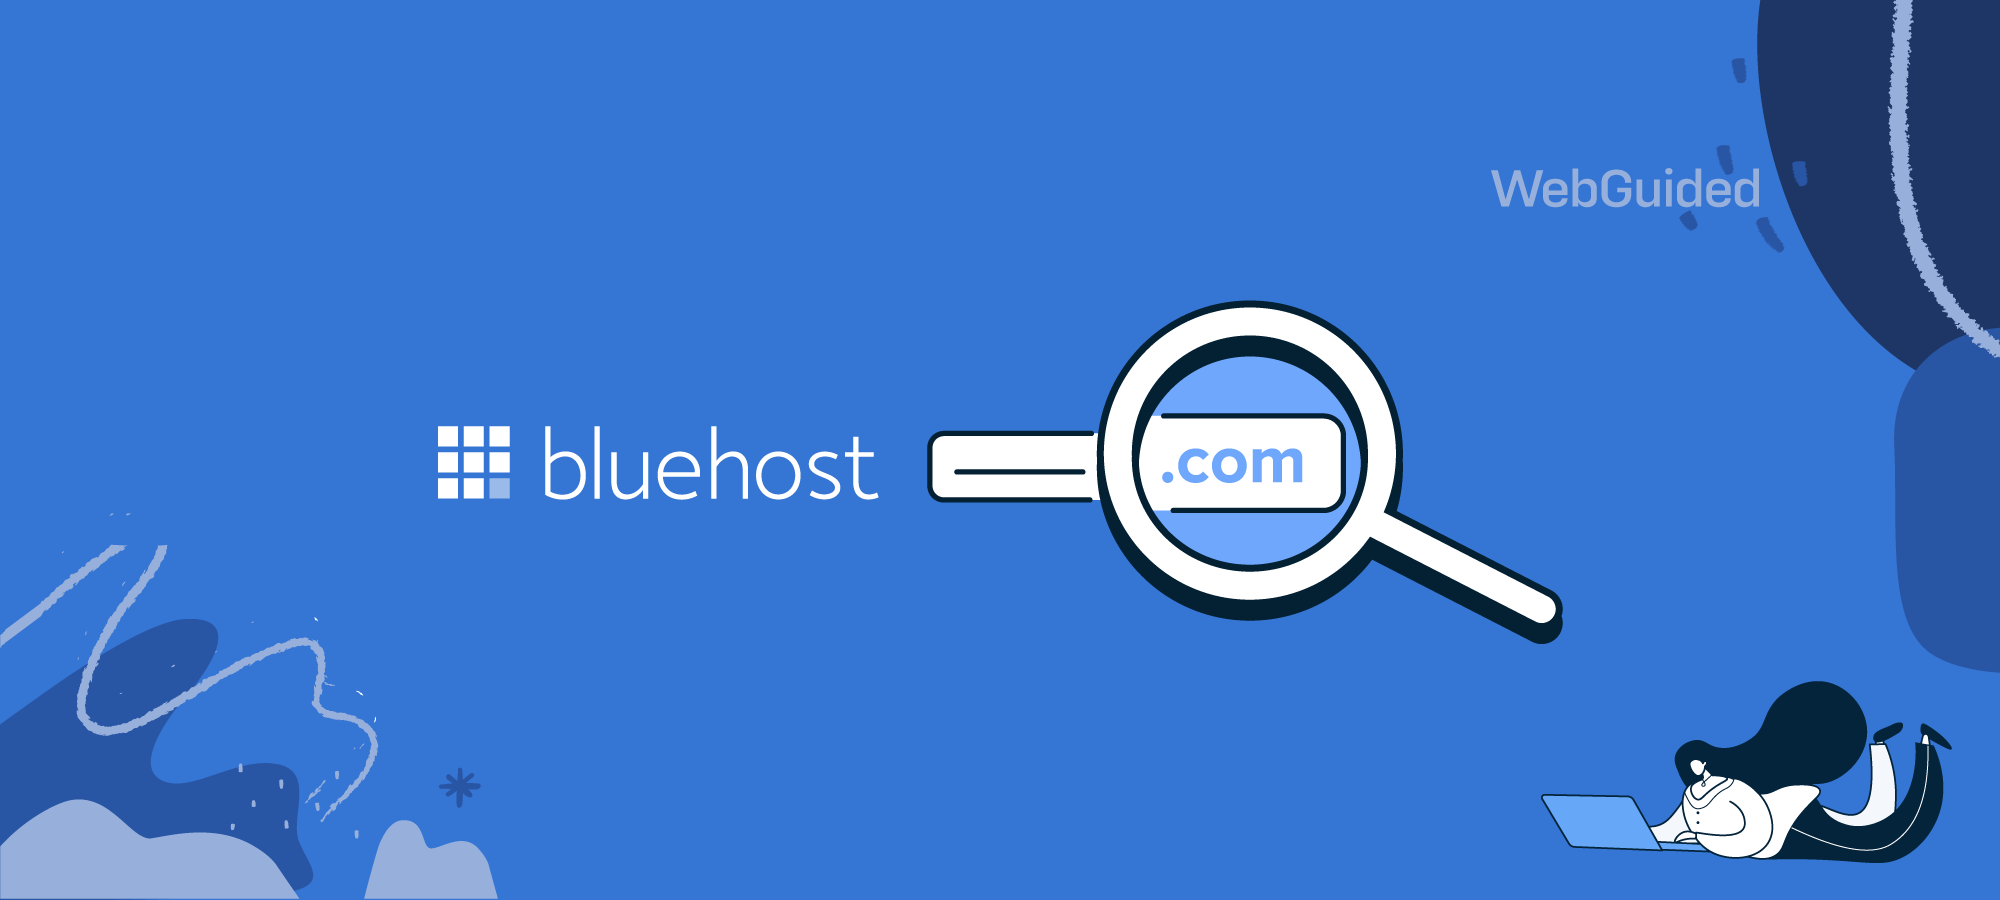 Bluehost Free Domain Name Deal  – Complete Guide